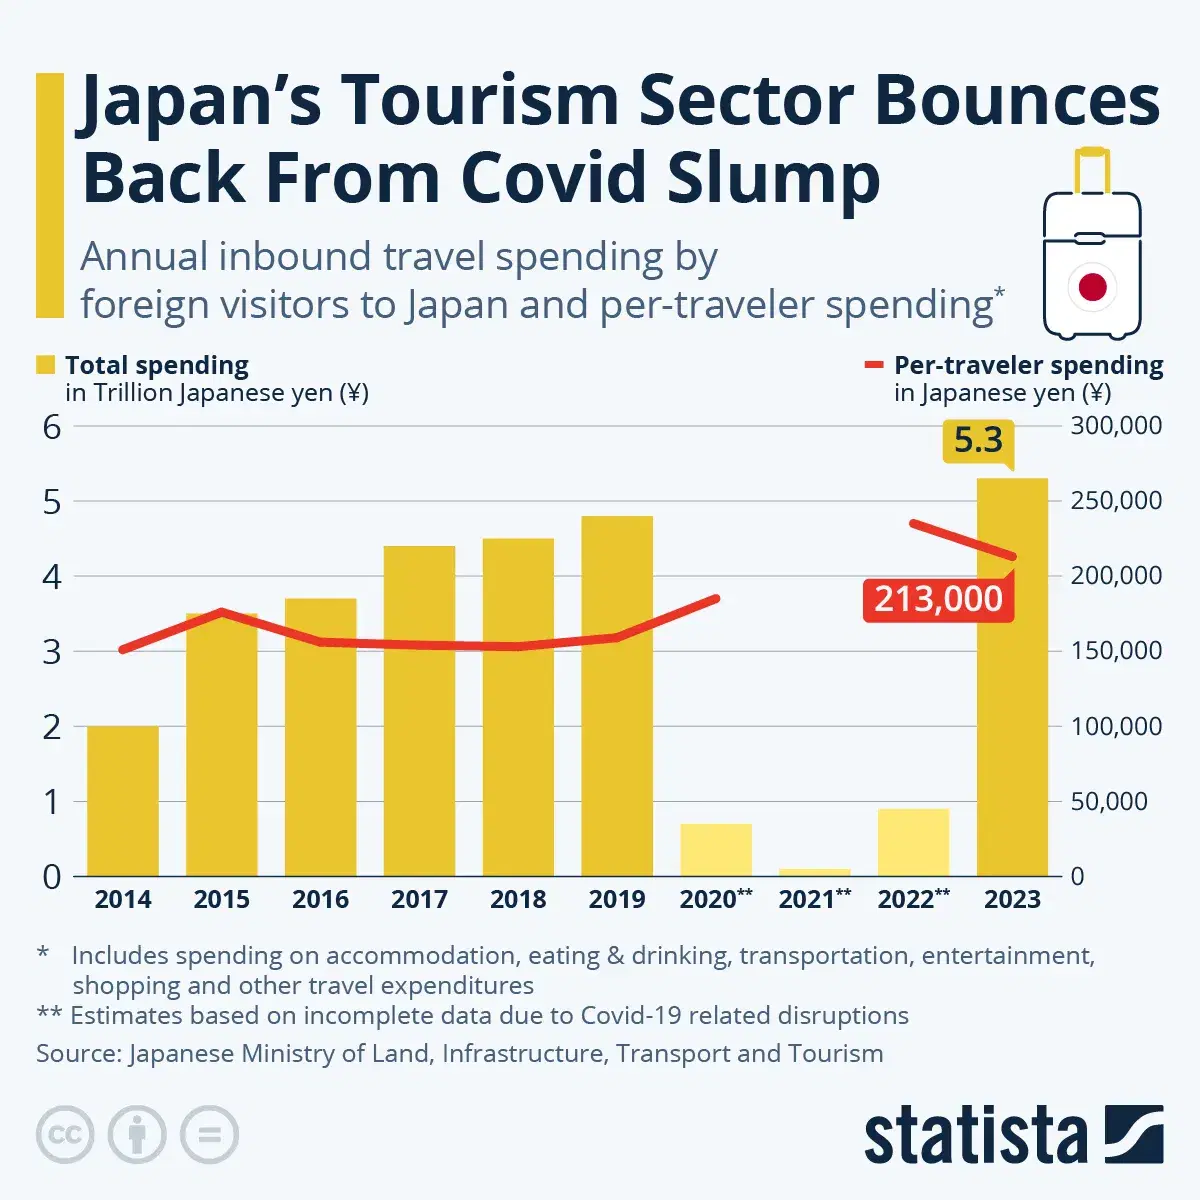 Japan’s Tourism Sector Bounces Back from Covid Slump